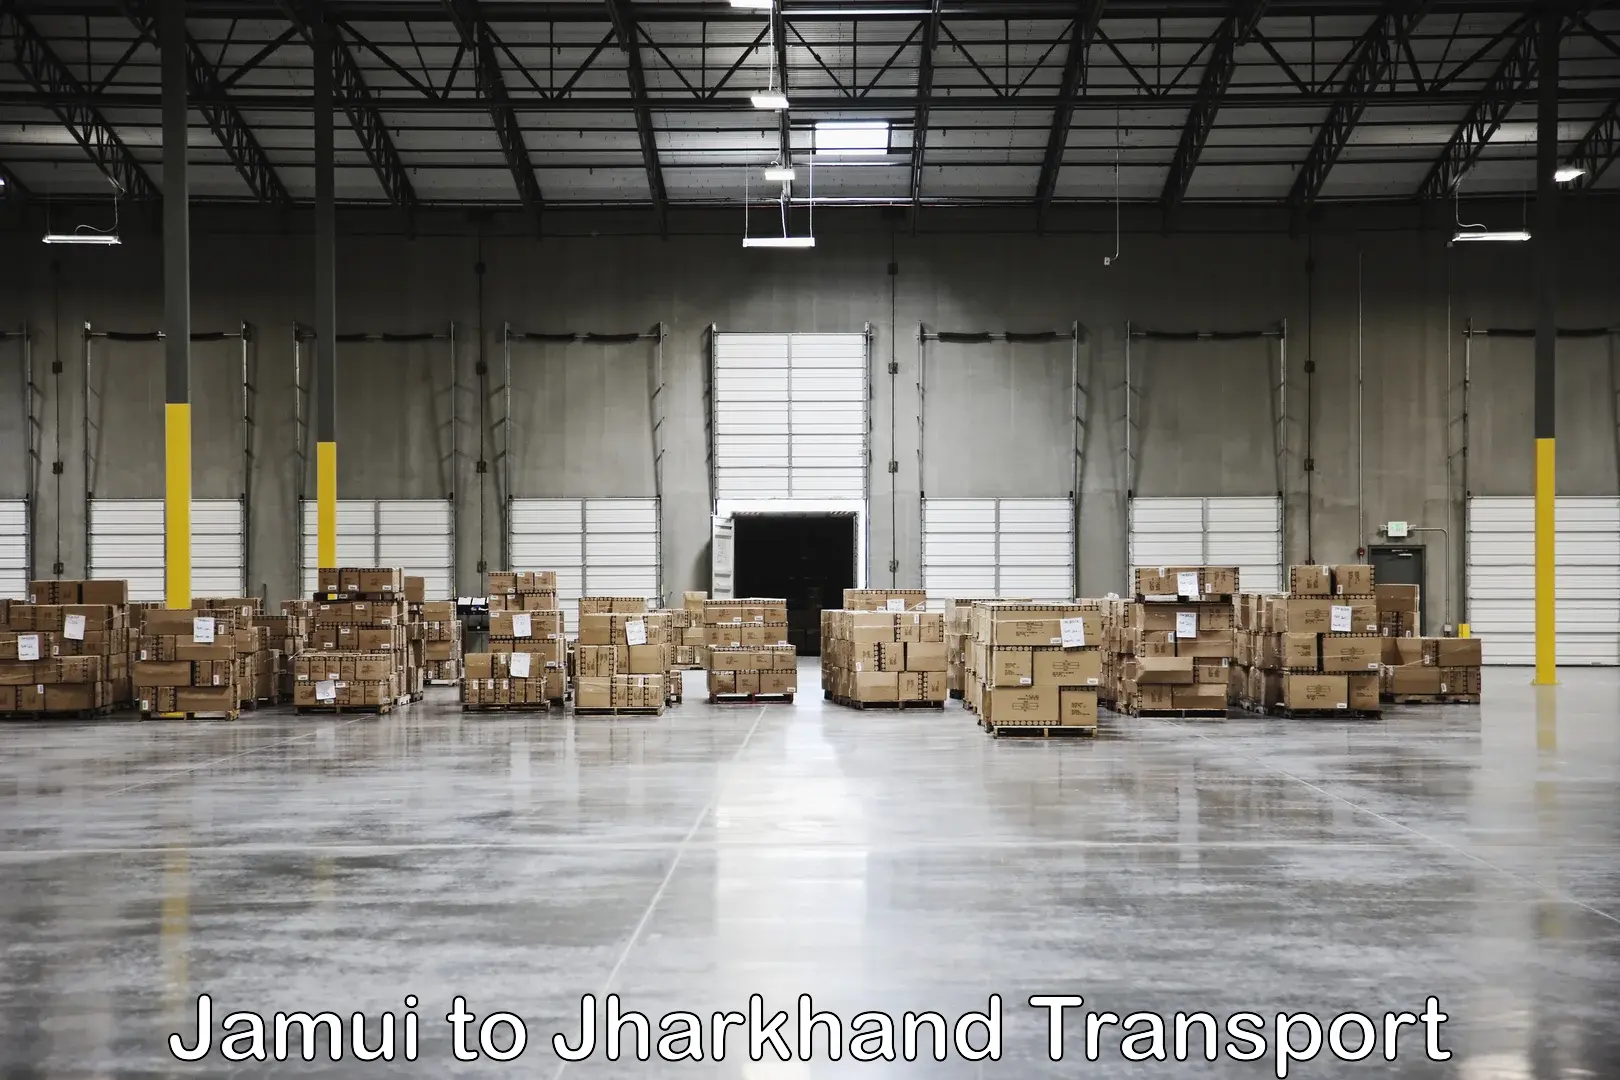 Air freight transport services Jamui to Dhanbad